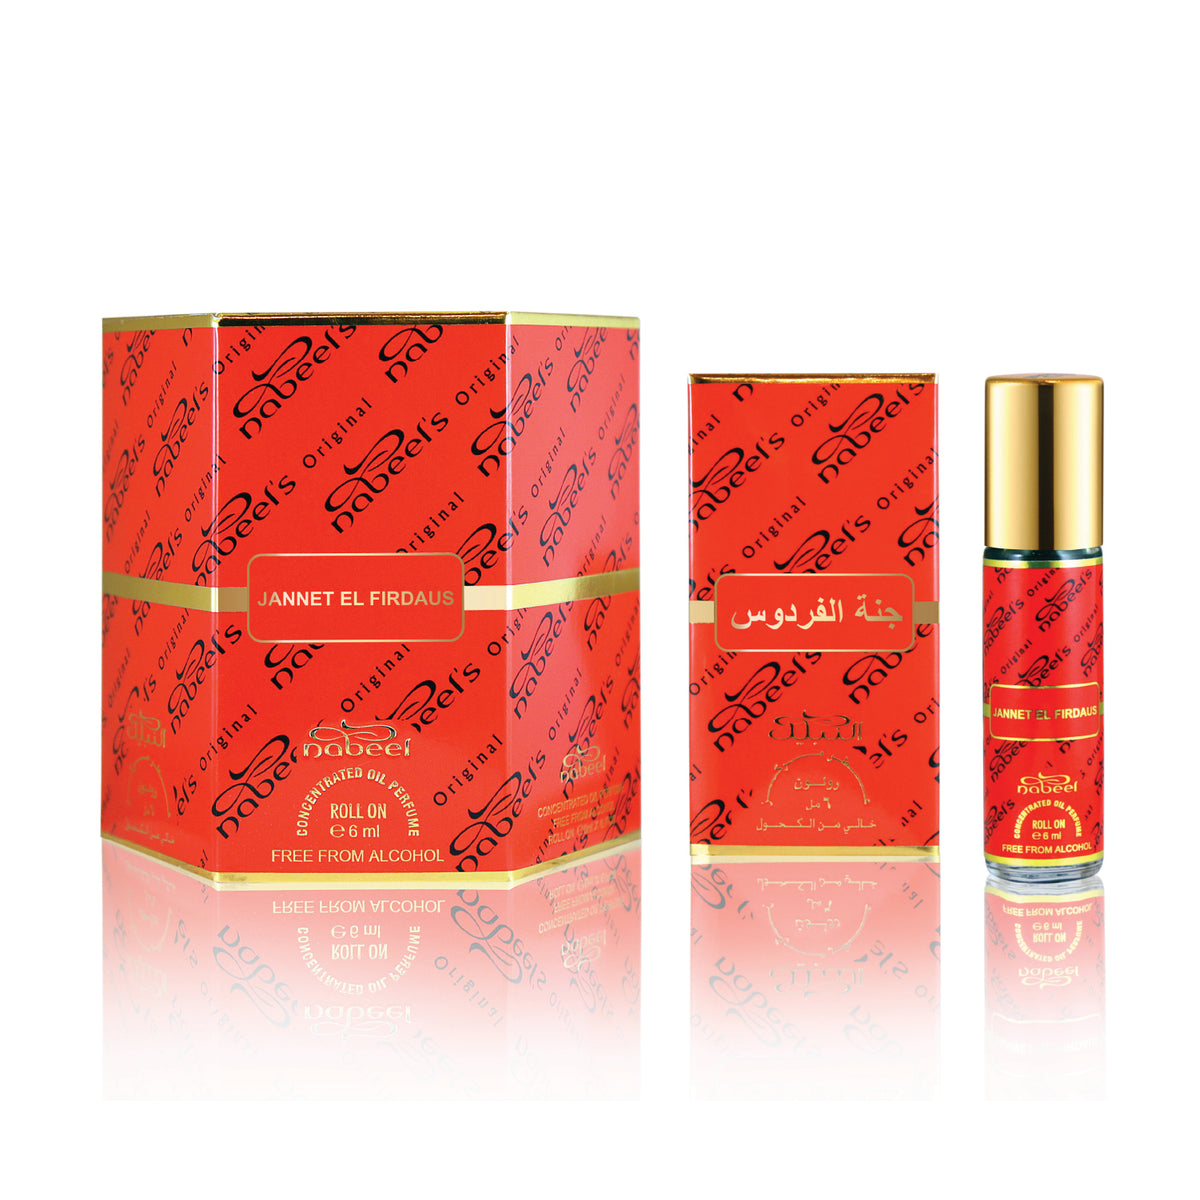 Nabeel - Jannat El Firdaus Premium Attar Roll-on Perfume Oil | 100% Non Alcoholic | Gift Set - 6ml (Pack of 6) | Made in U.A.E